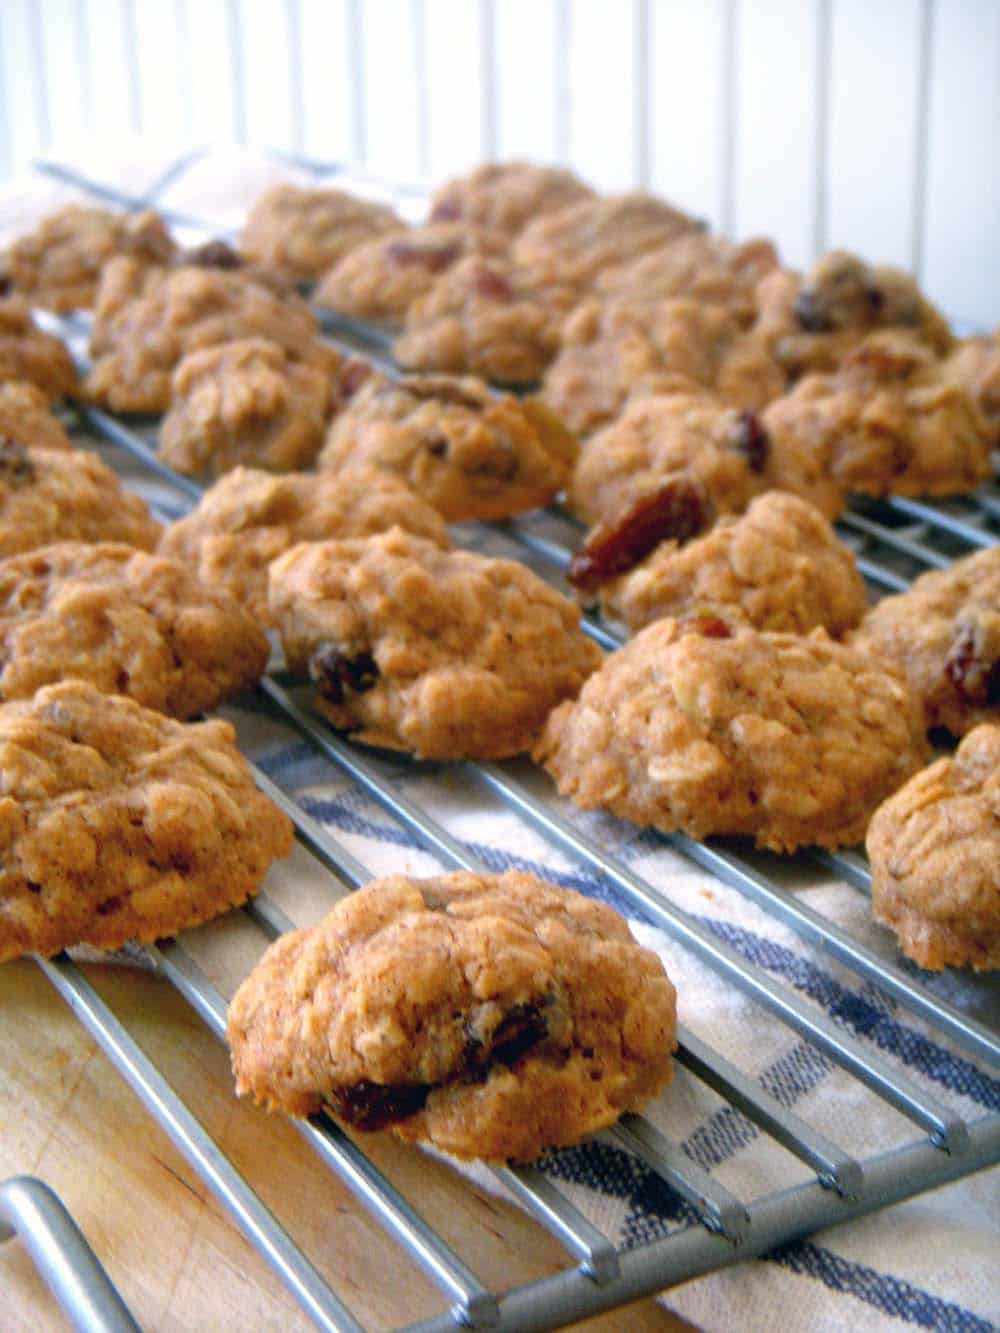 Maple oatmeal raisin cookies spread out on a cooling rack.